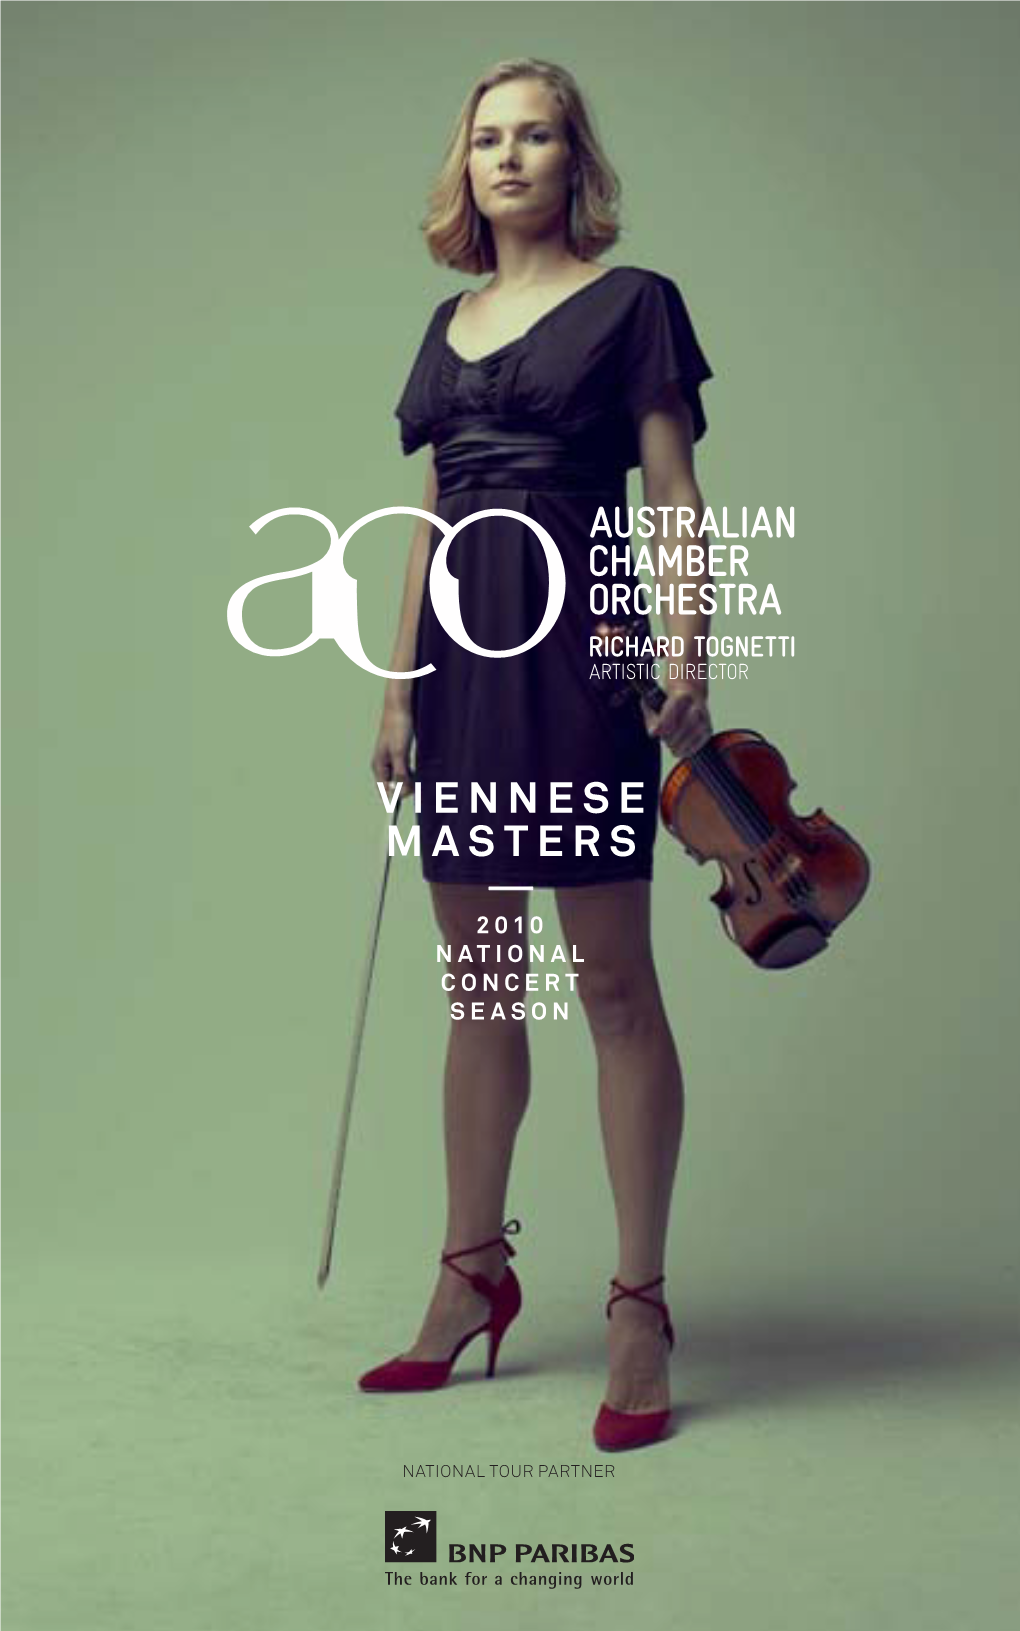 Viennese Masters — 2010 National Concert Season